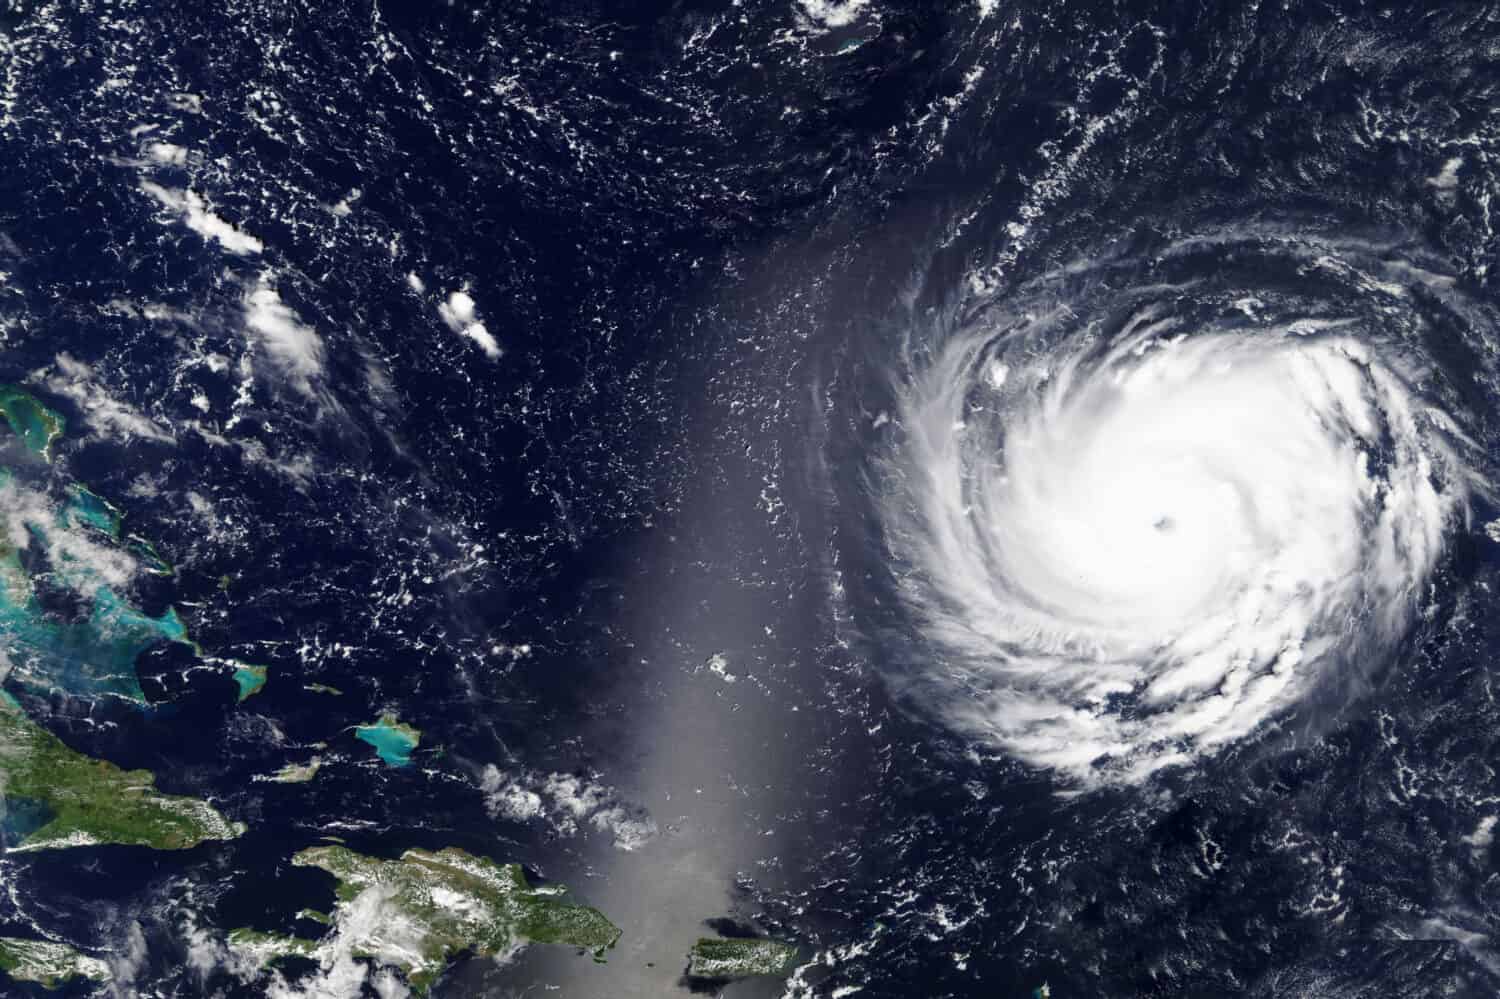 Hurricane Florence heading towards the East Coast of the United States in September 2018 - Elements of this image furnished by NASA